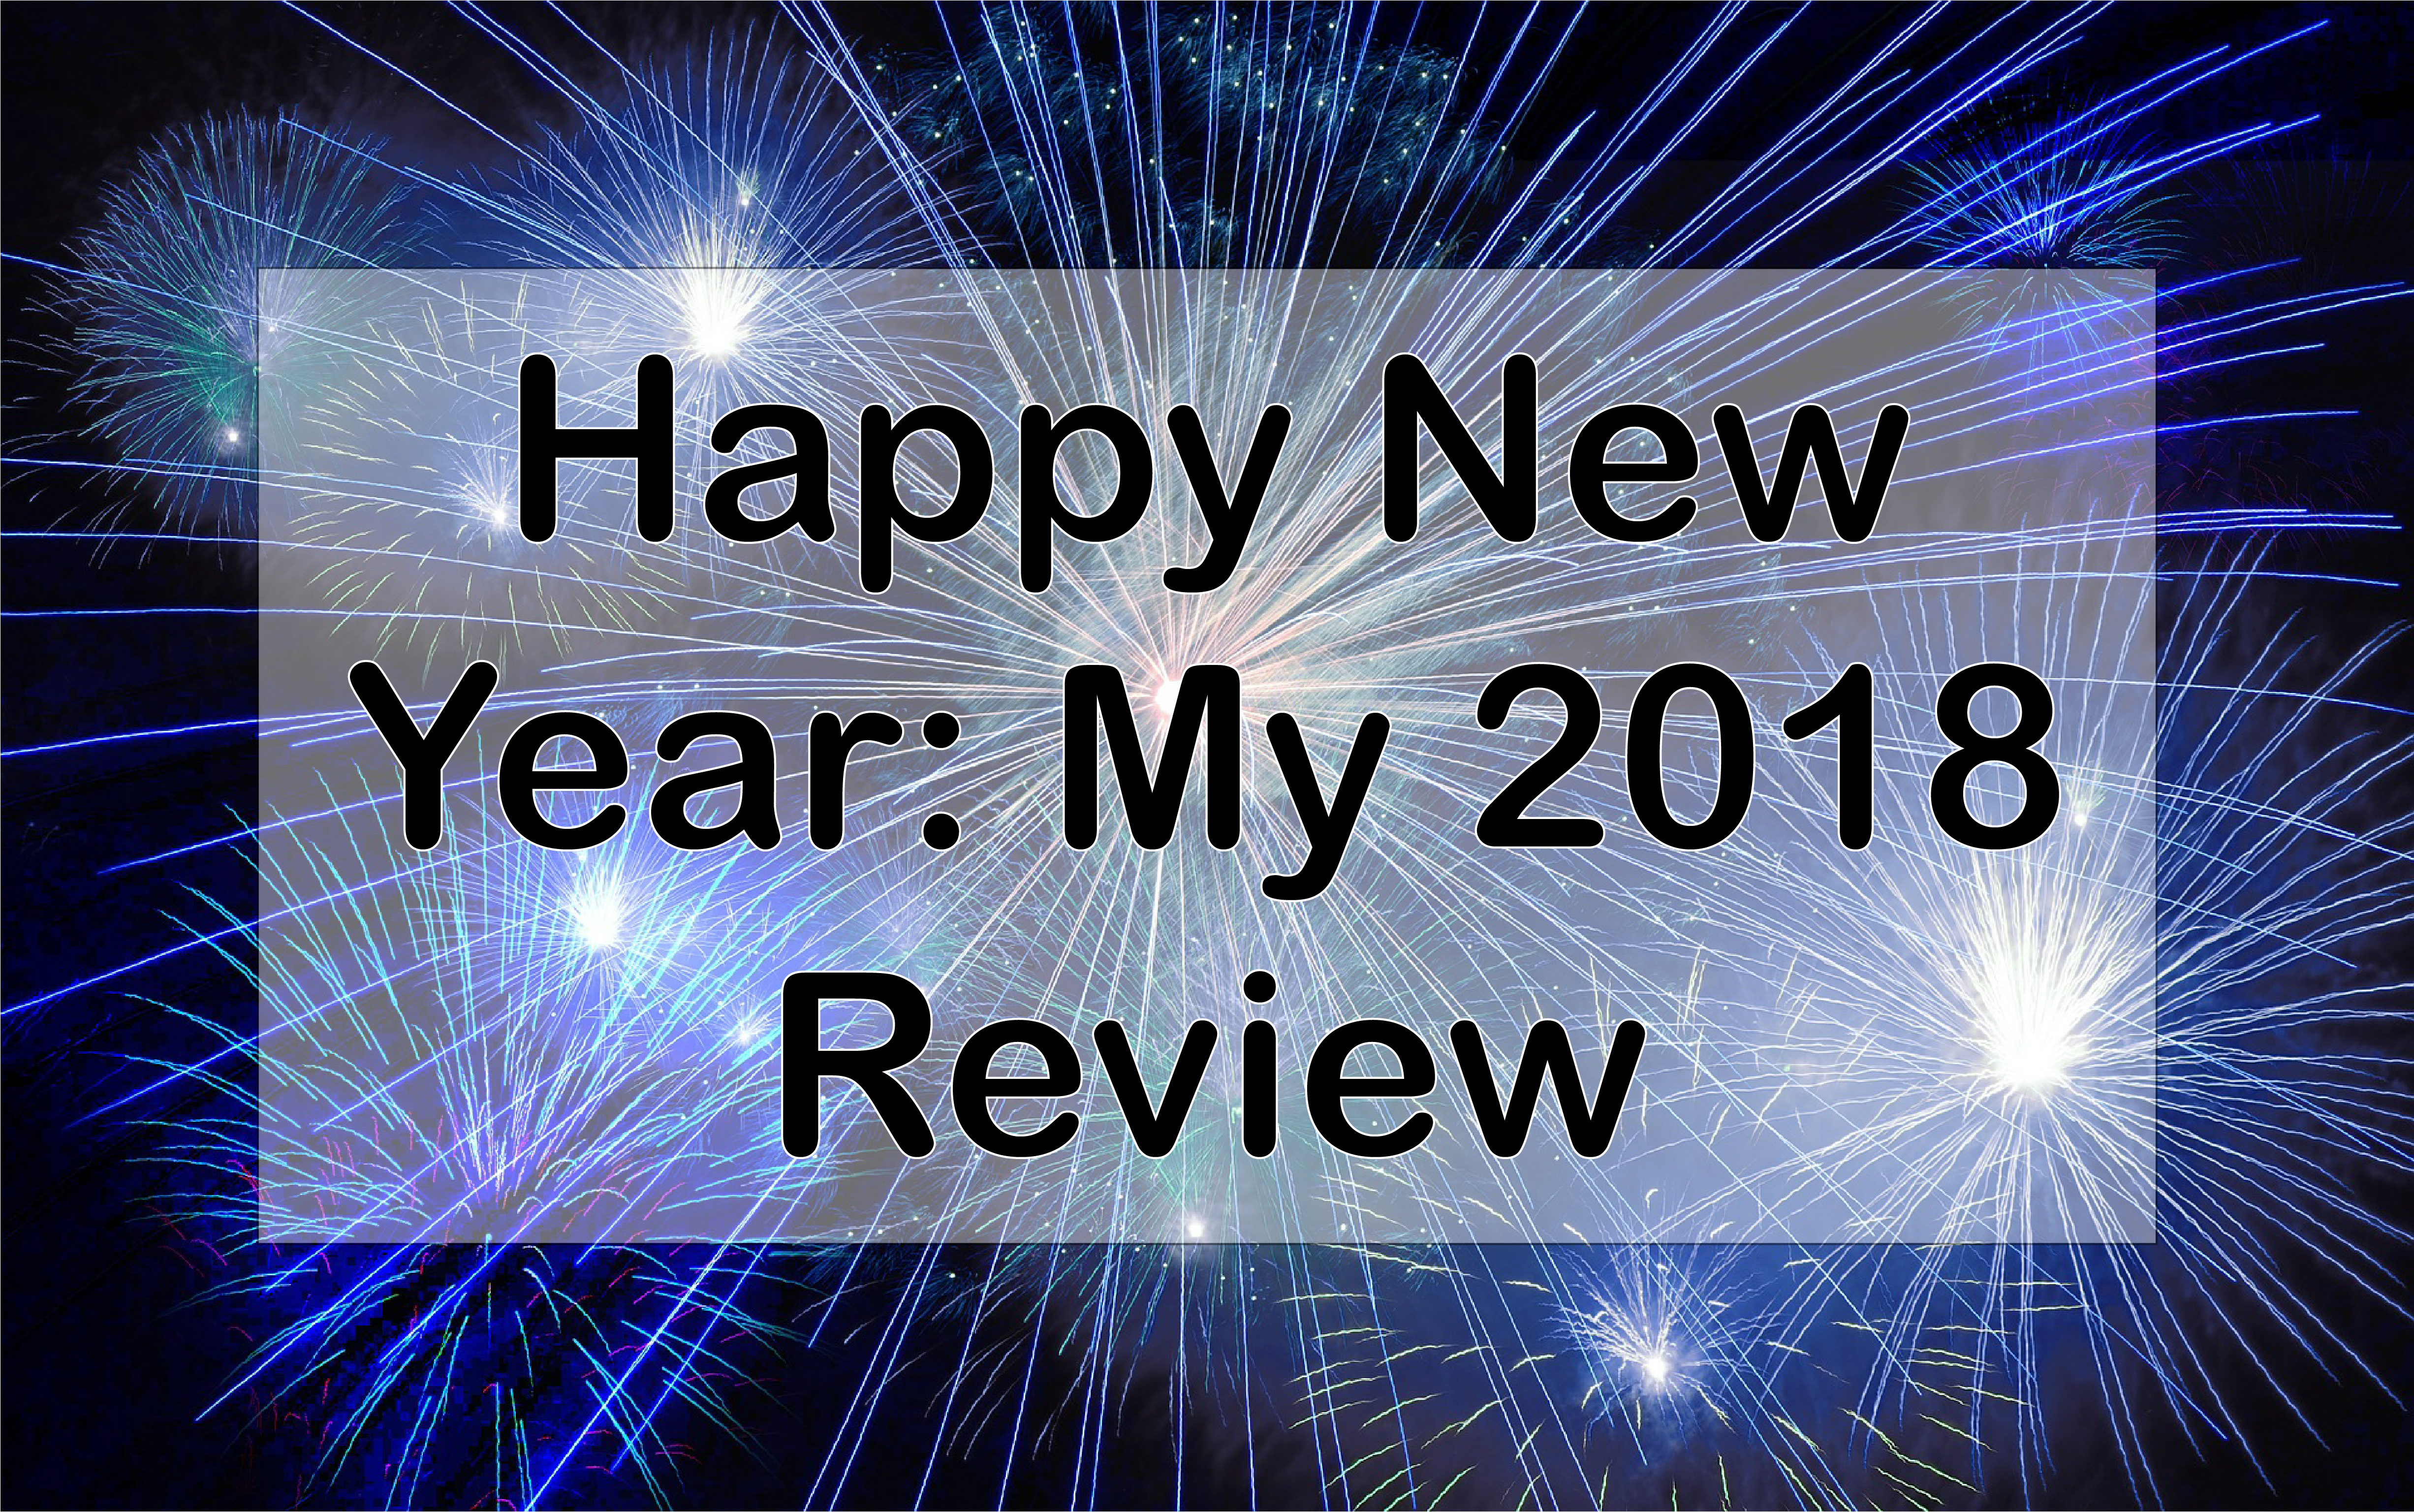 Happy New Year: My 2018 Review